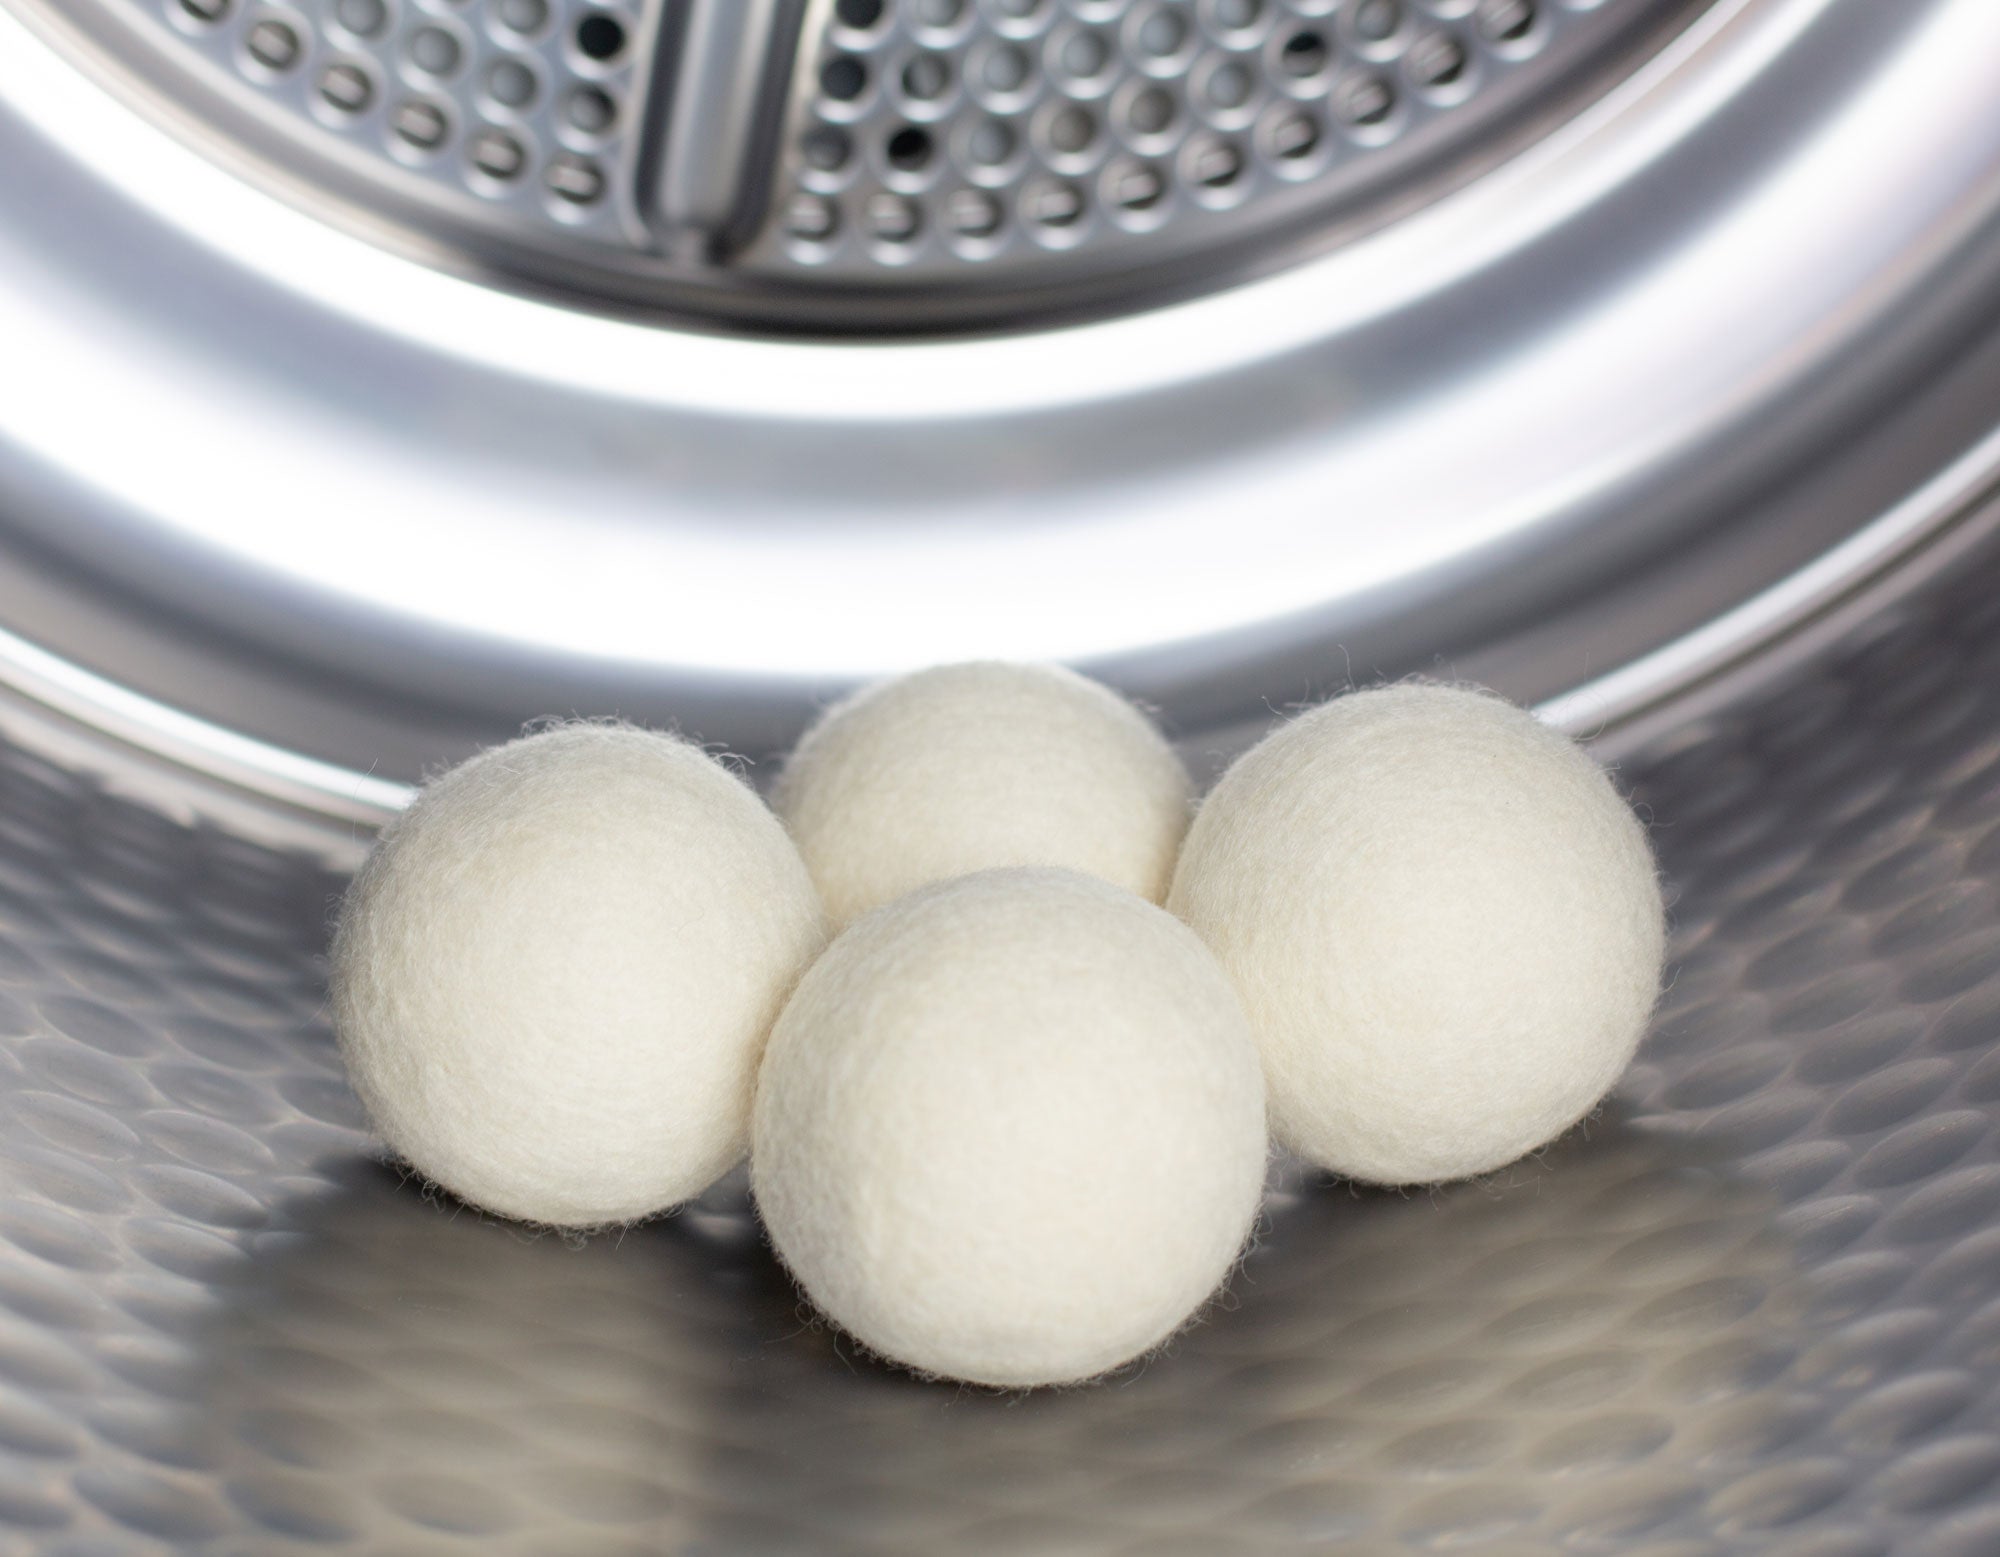 Wool Dryer Balls in A Tumble Dryer | scooms